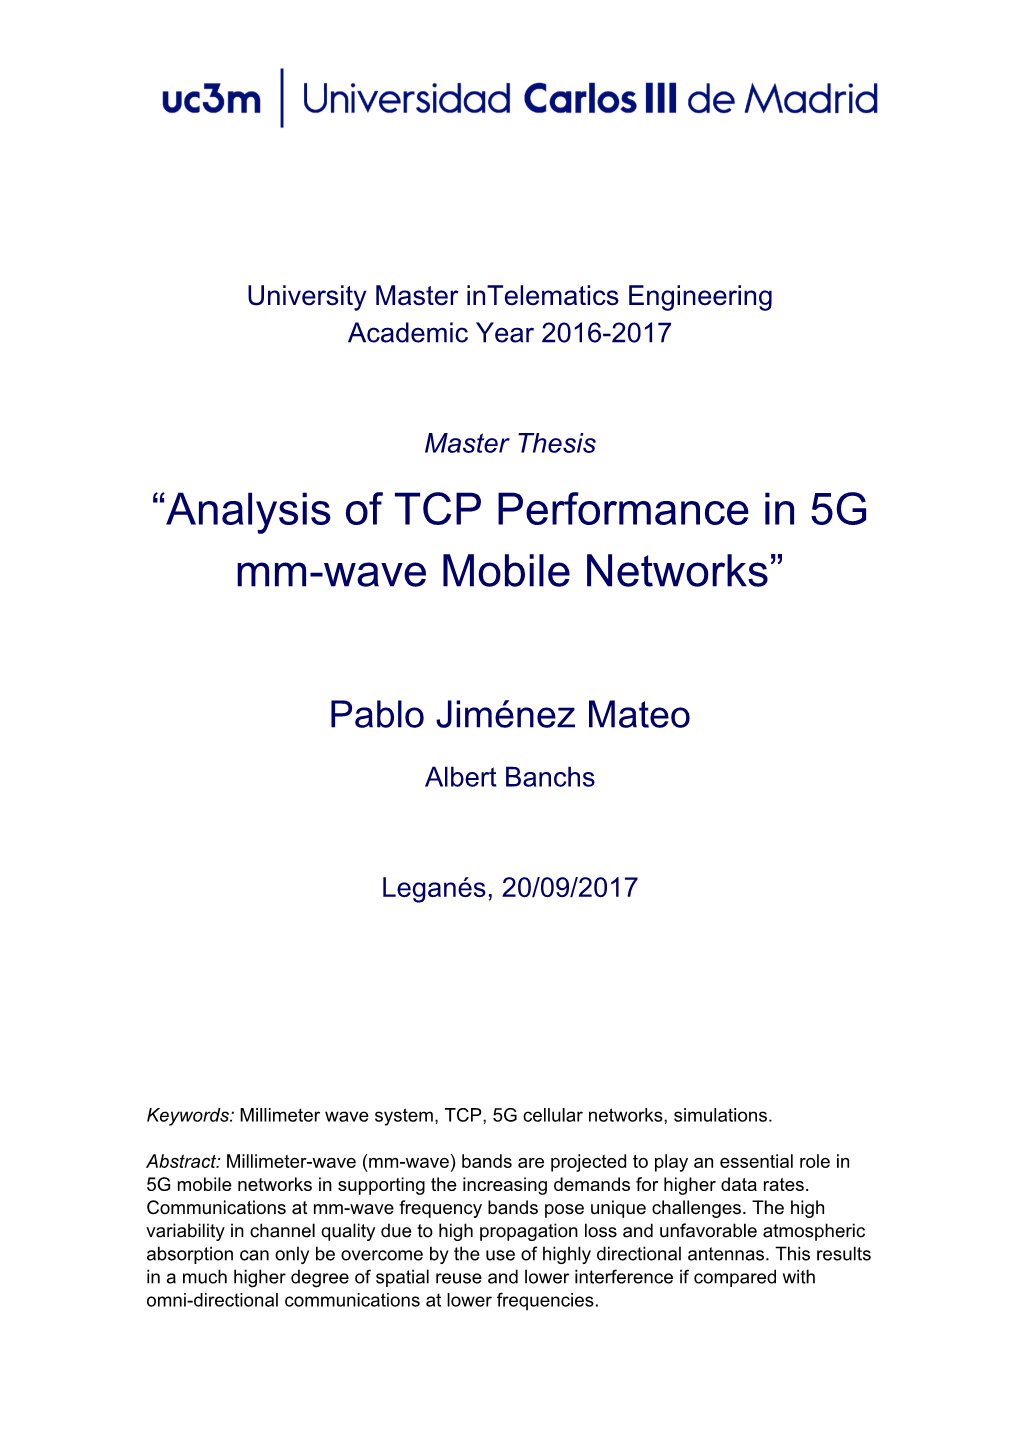 Analysis​​Of​​TCP​​Performance​​In​​5G Mm-Wave​​Mobile